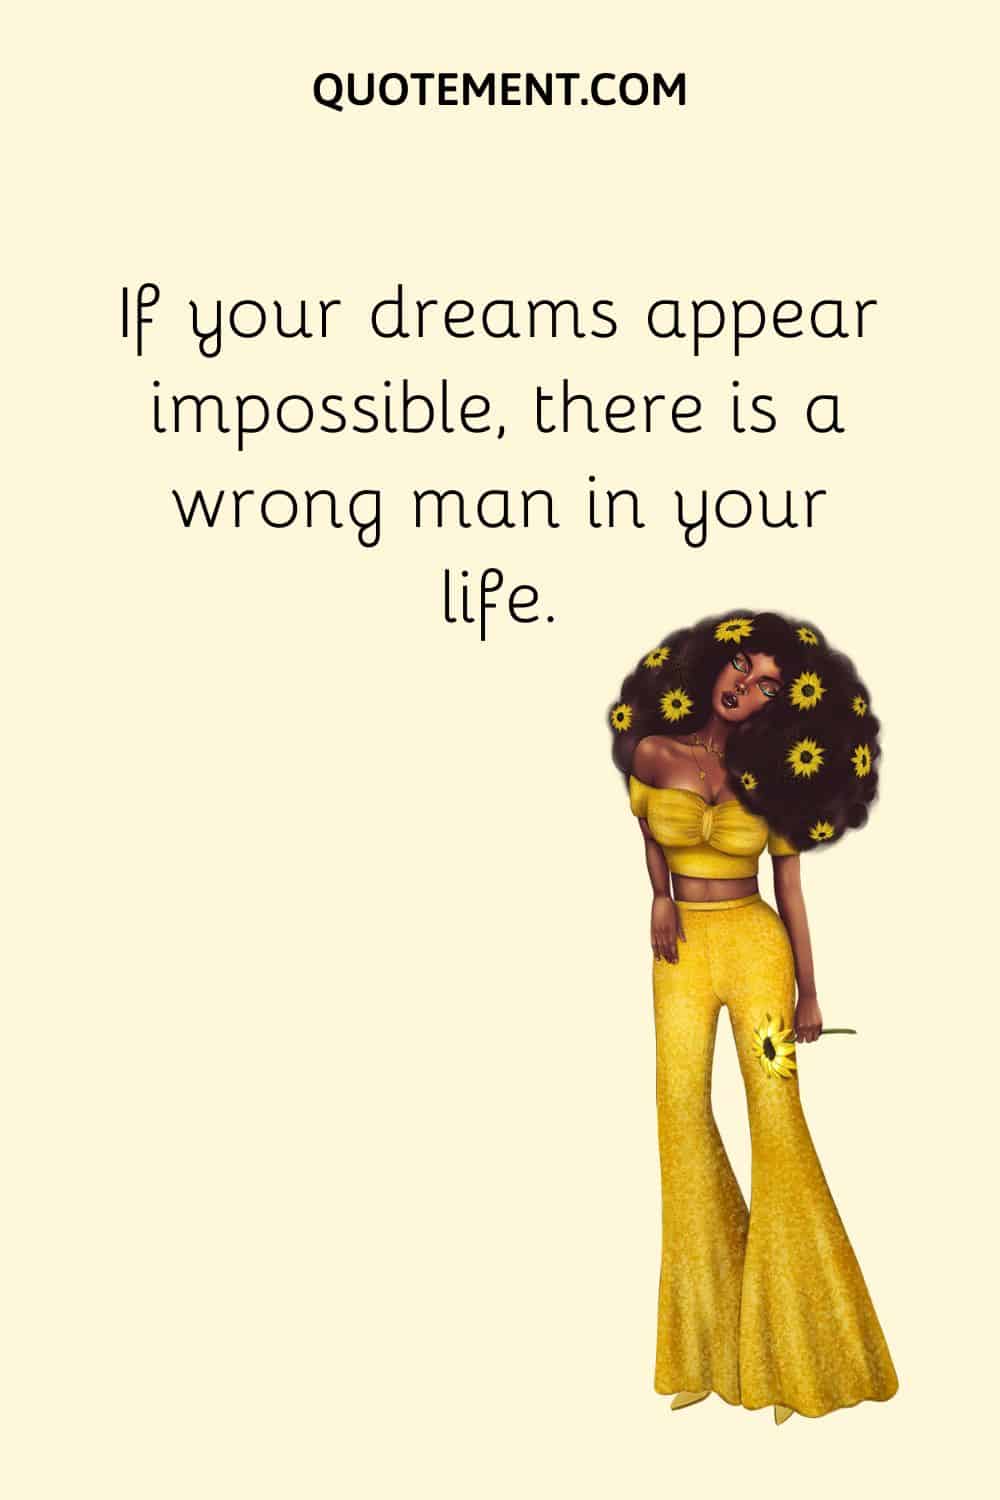 If your dreams appear impossible, there is a wrong man in your life.